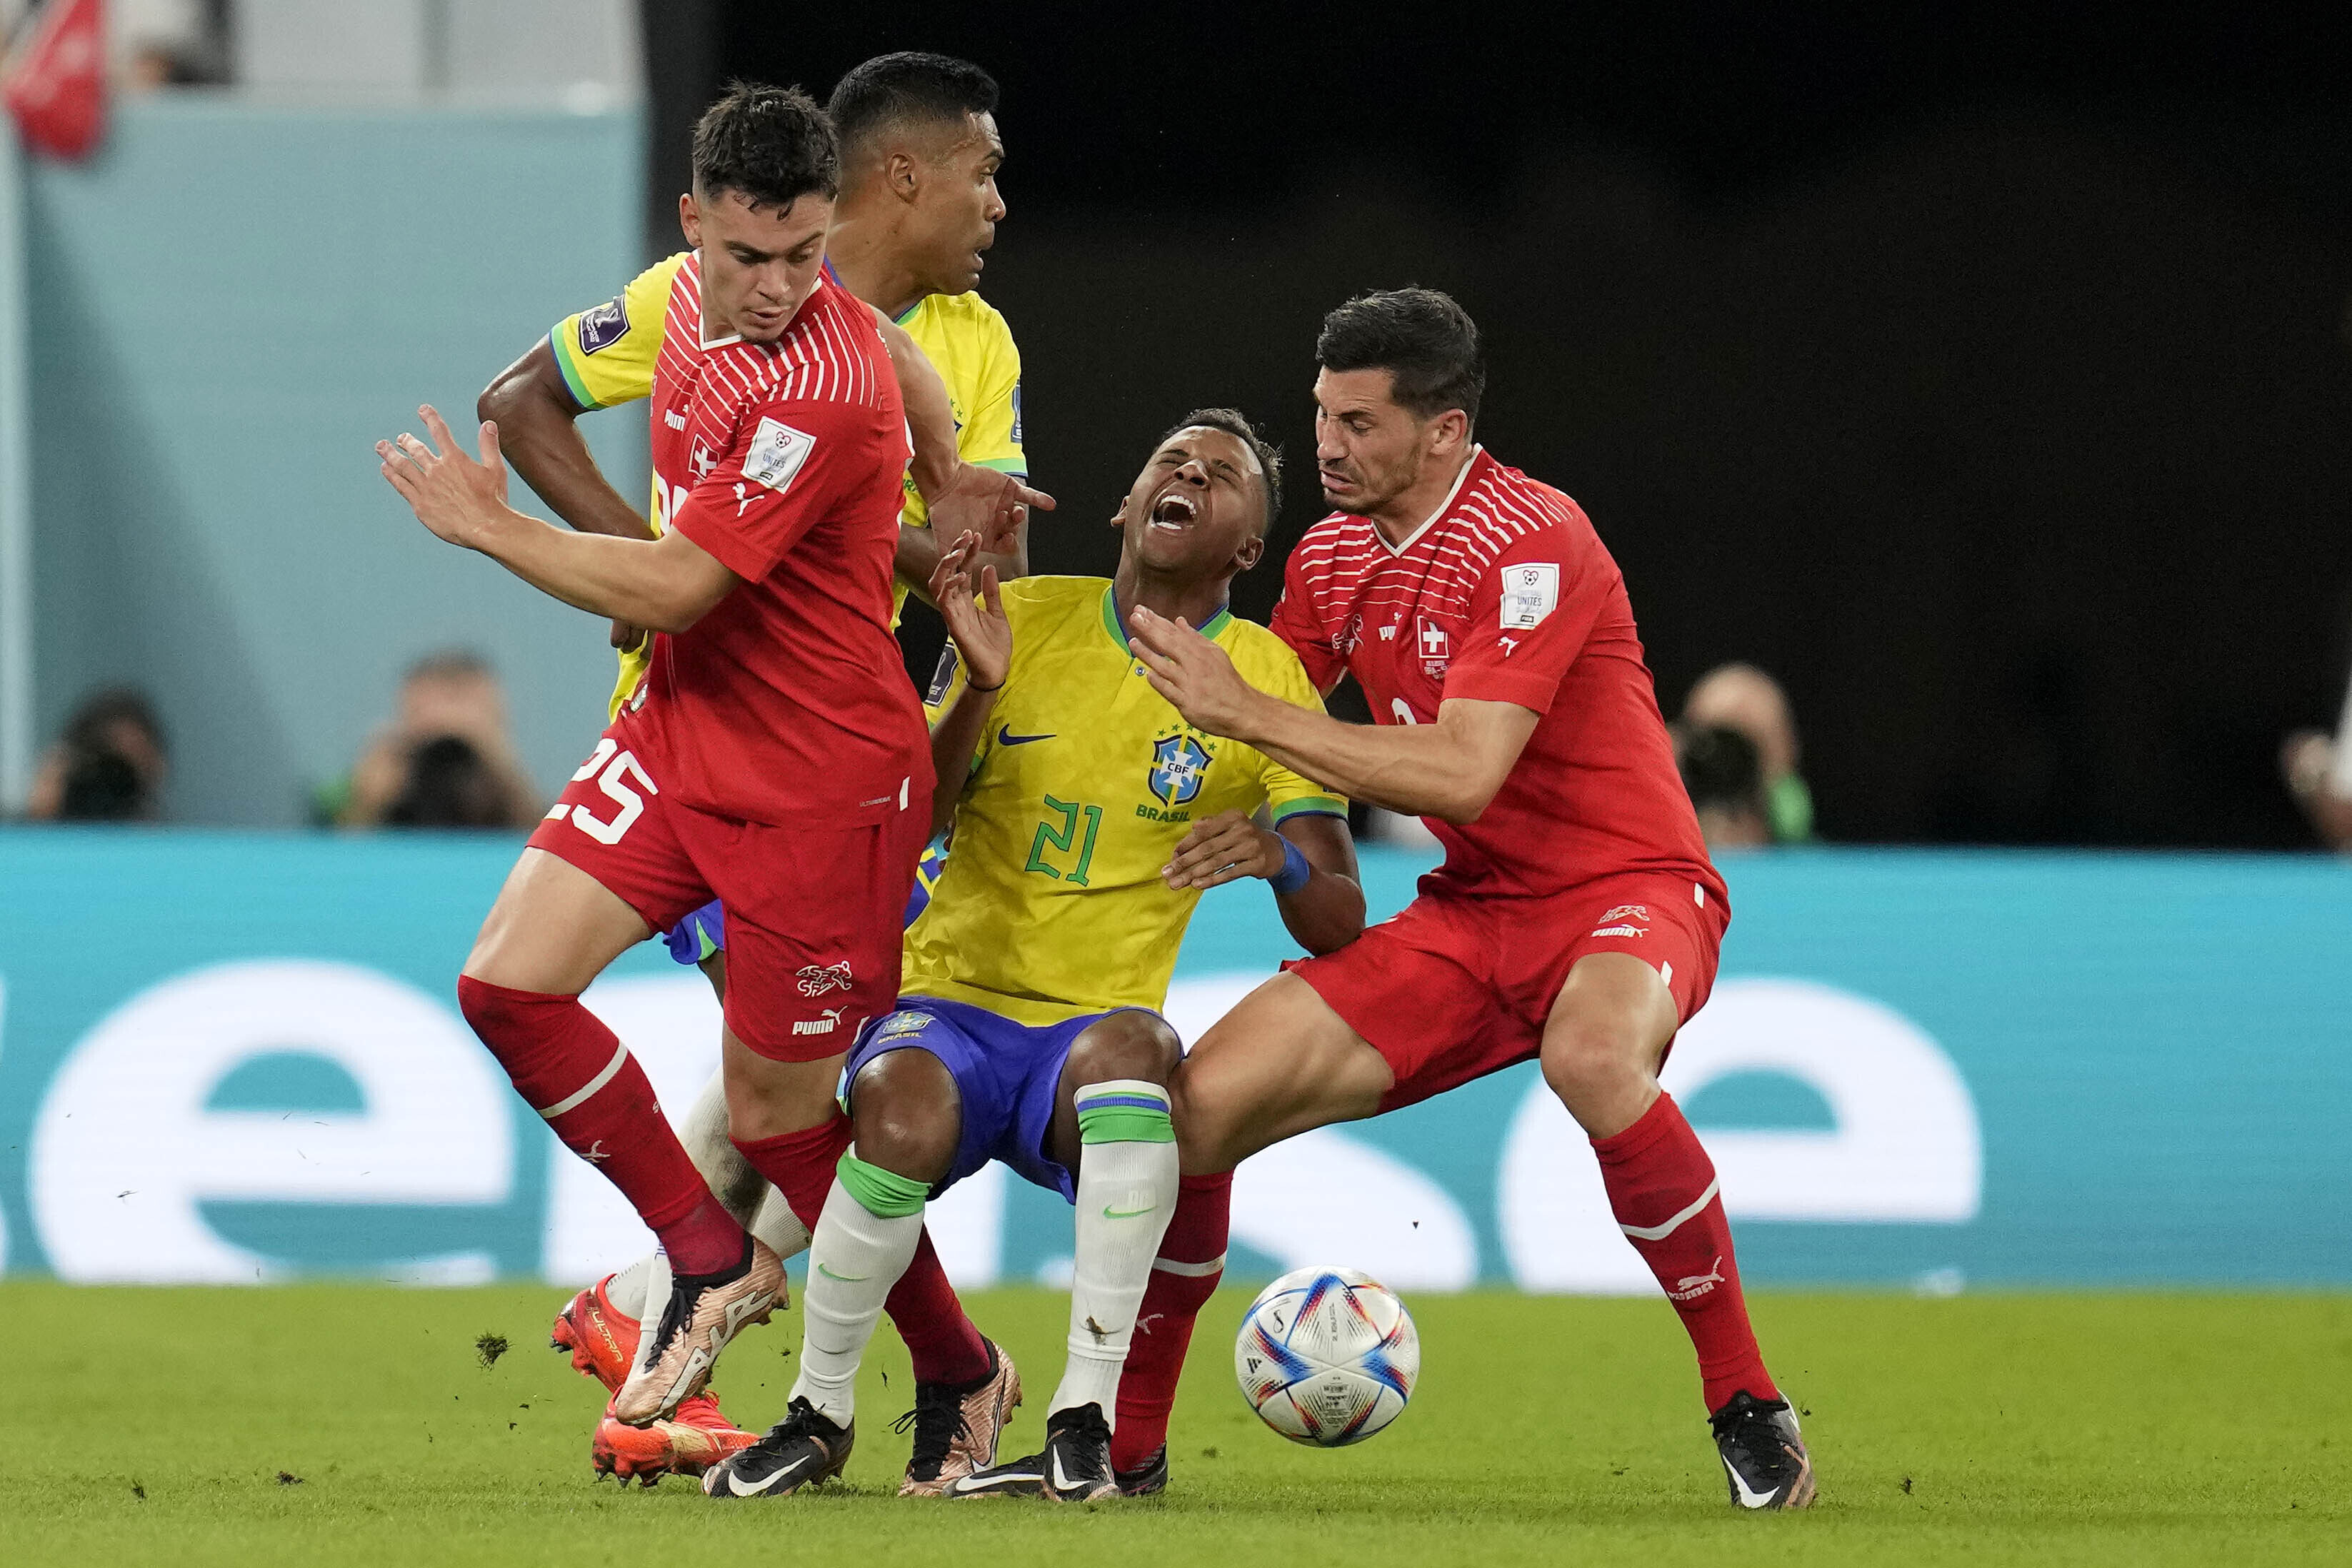 Brazil Advances At World Cup With 1-0 Win Over Switzerland - Bloomberg